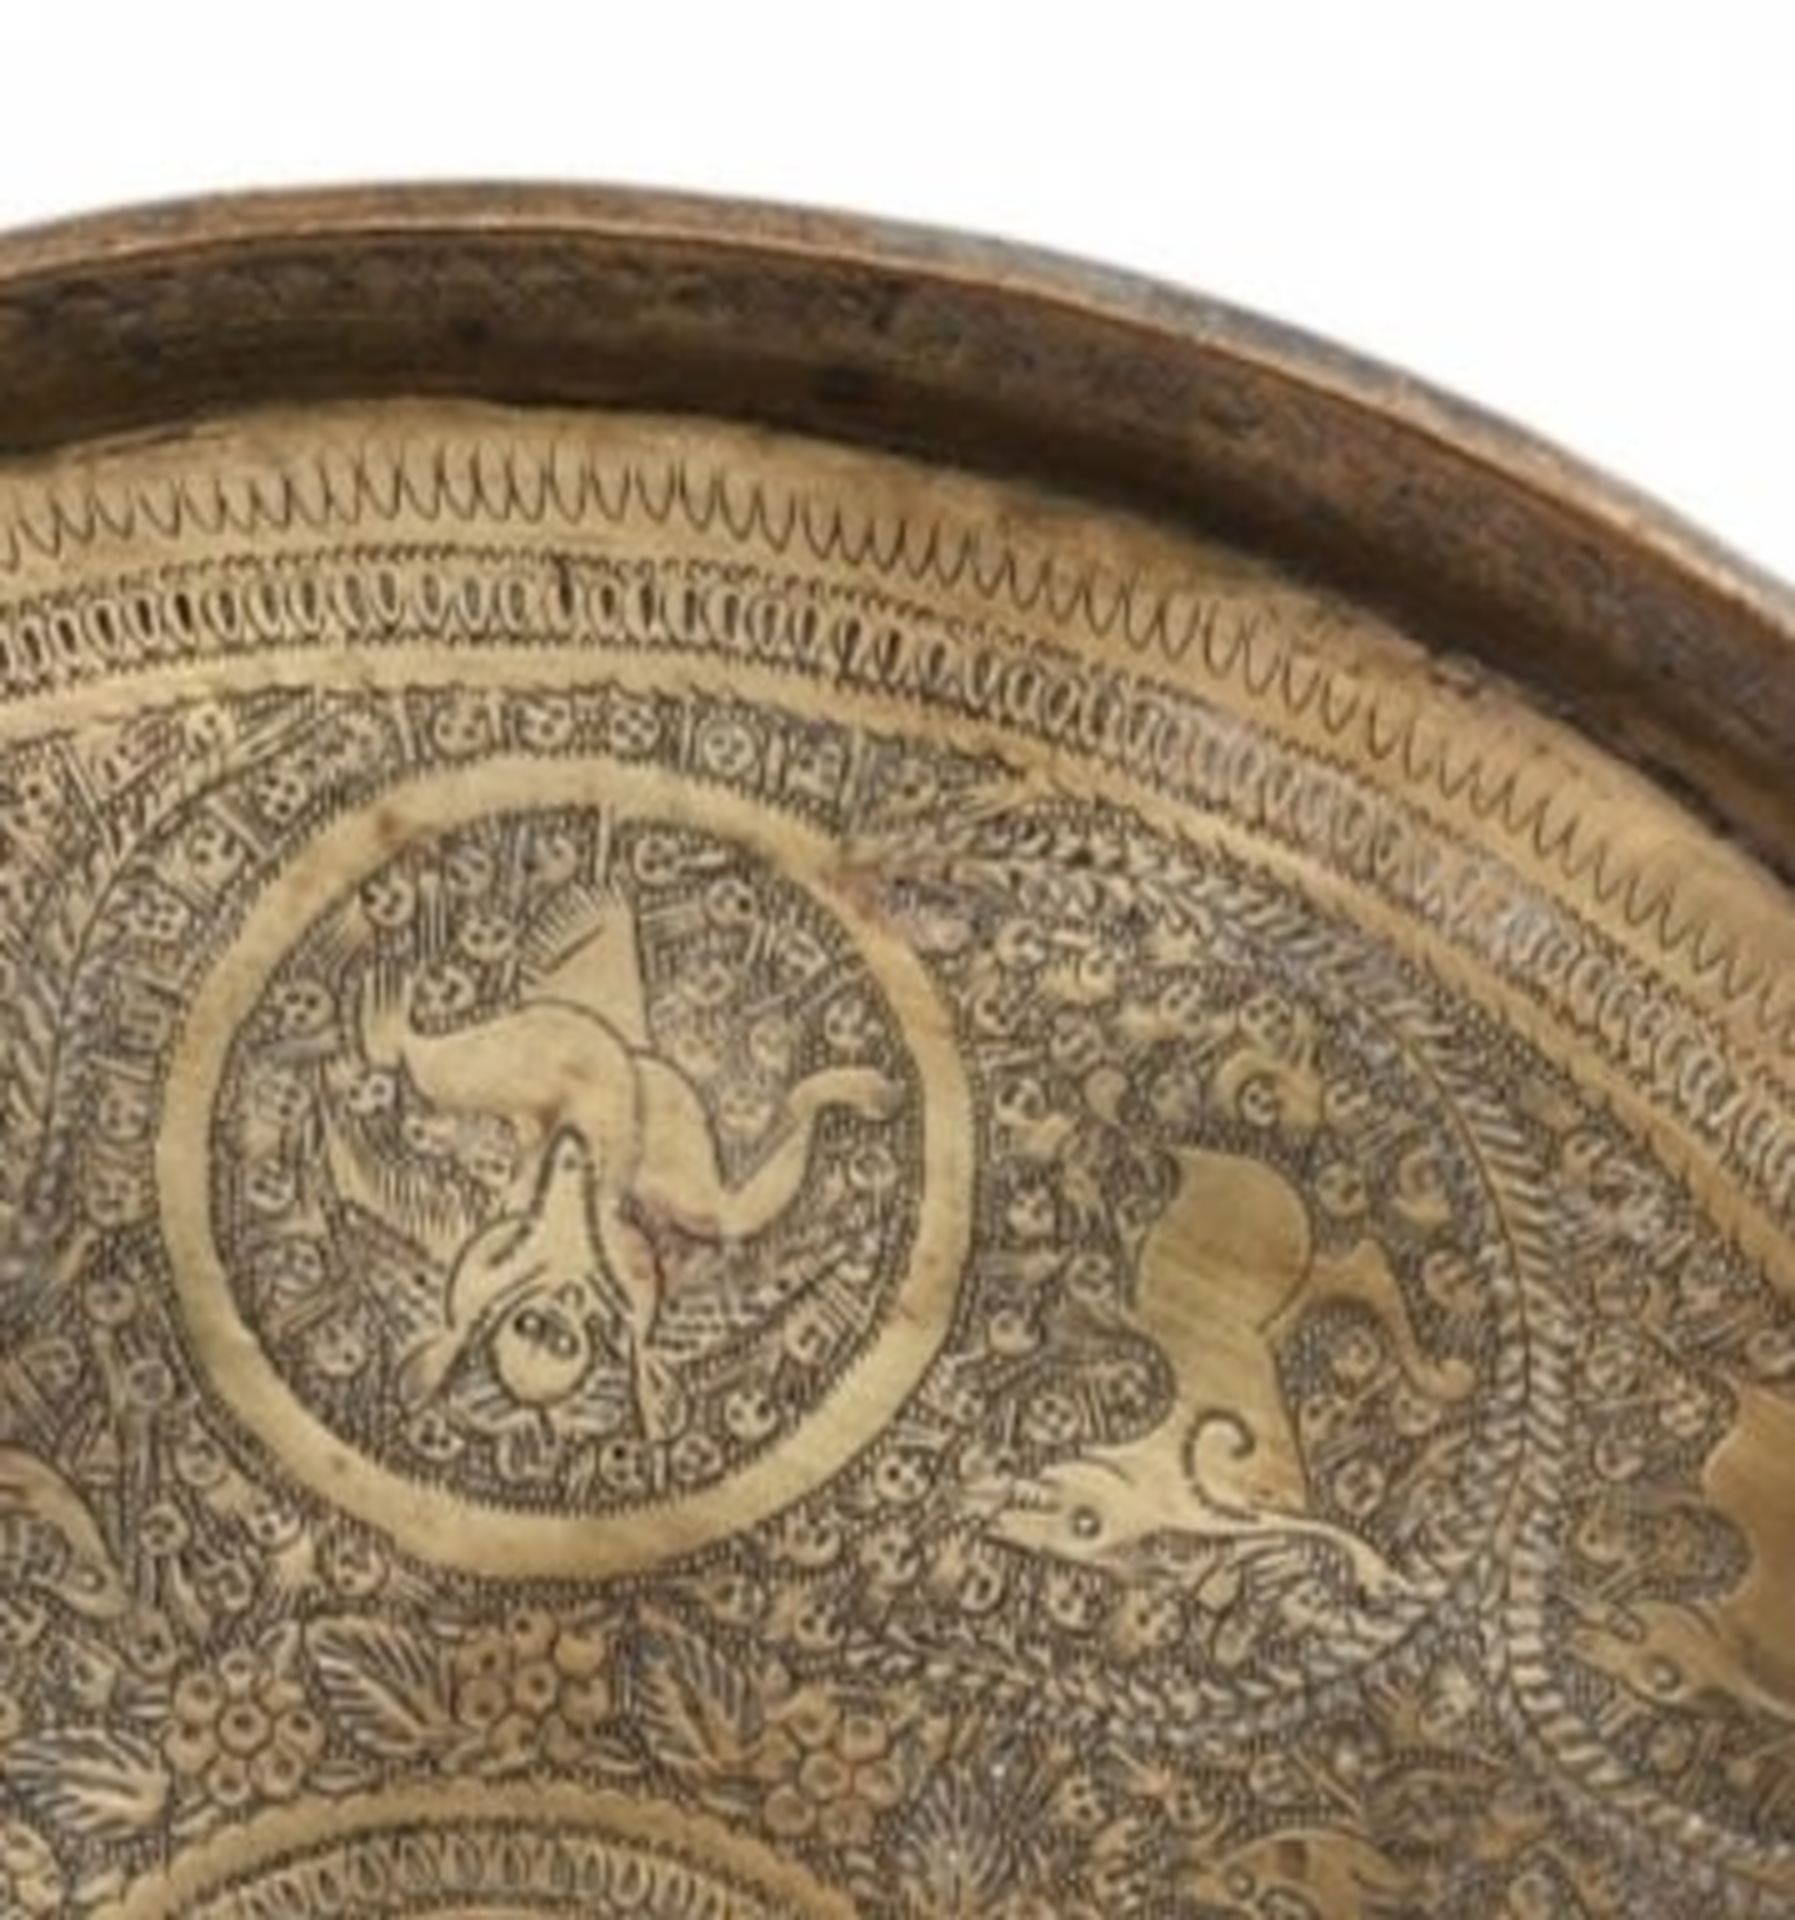 Antique Persian Hindu Platter from the 19th century, made of brass, decorated with hand-engraved - Image 3 of 3